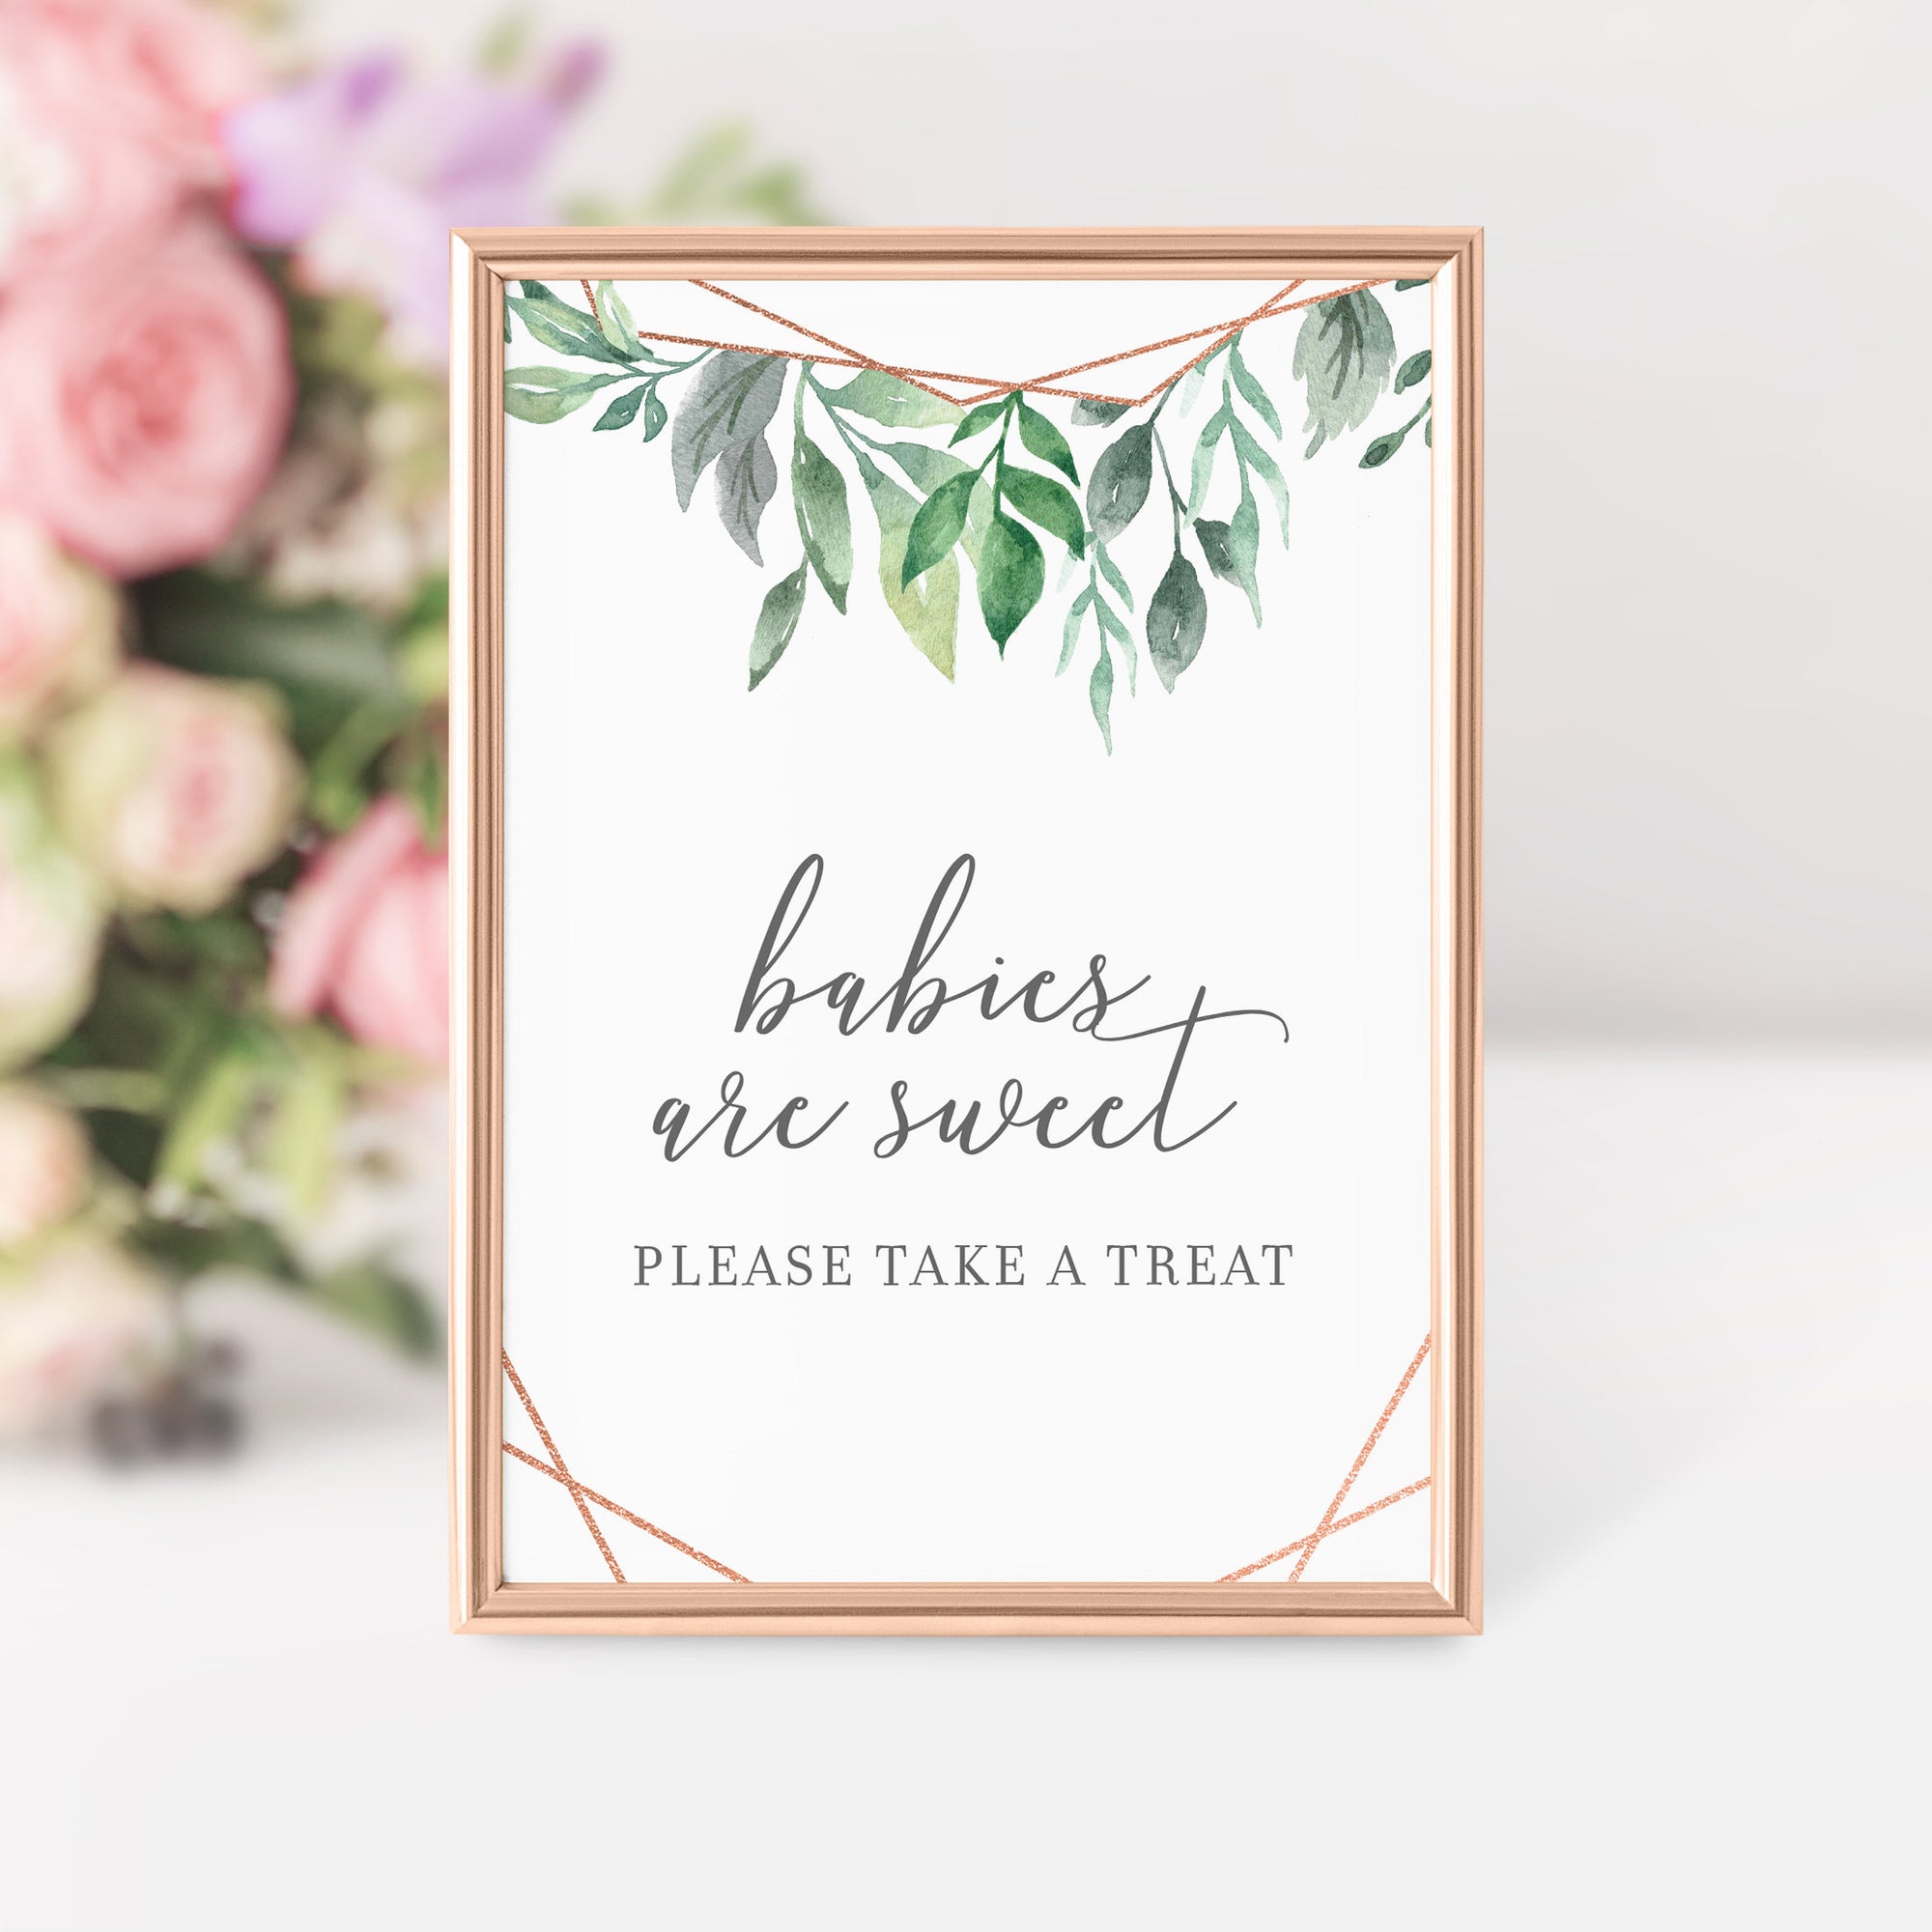 Geometric Rose Gold Greenery Printable Treat Sign, INSTANT DOWNLOAD, Baby Shower Decorations, Sip and See Babies Are Sweet Dessert - GFRG100 - @PlumPolkaDot 